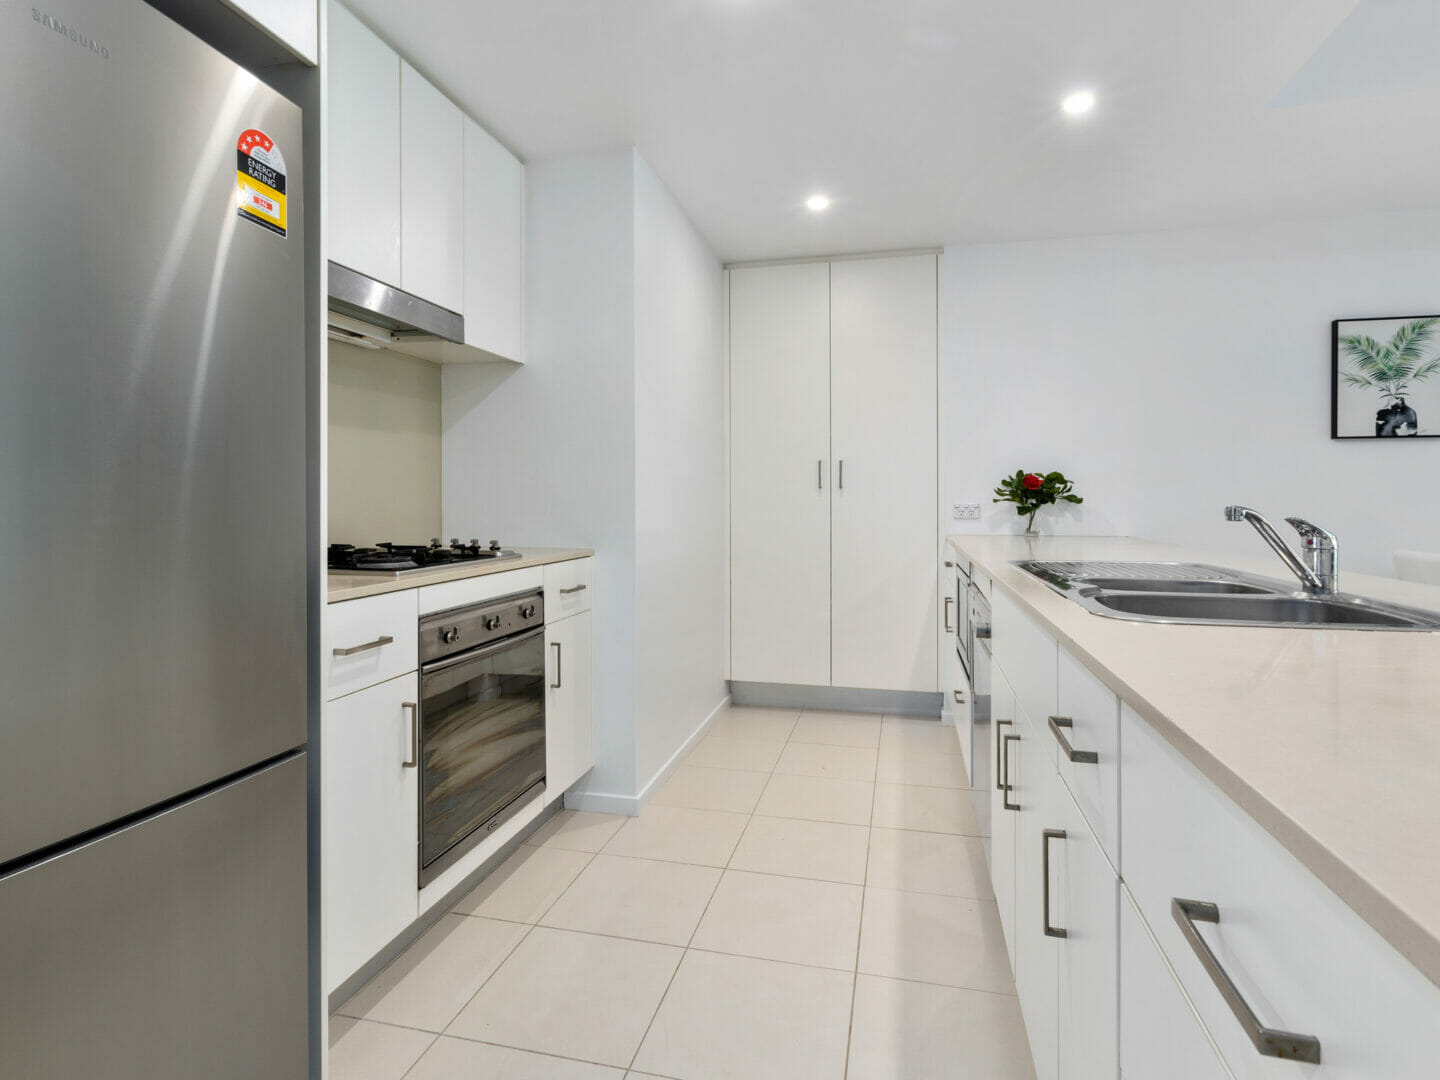 Kitchen with peninsula shaped layout, stainless steel fridge, wall oven, dishwasher, microwave and sink